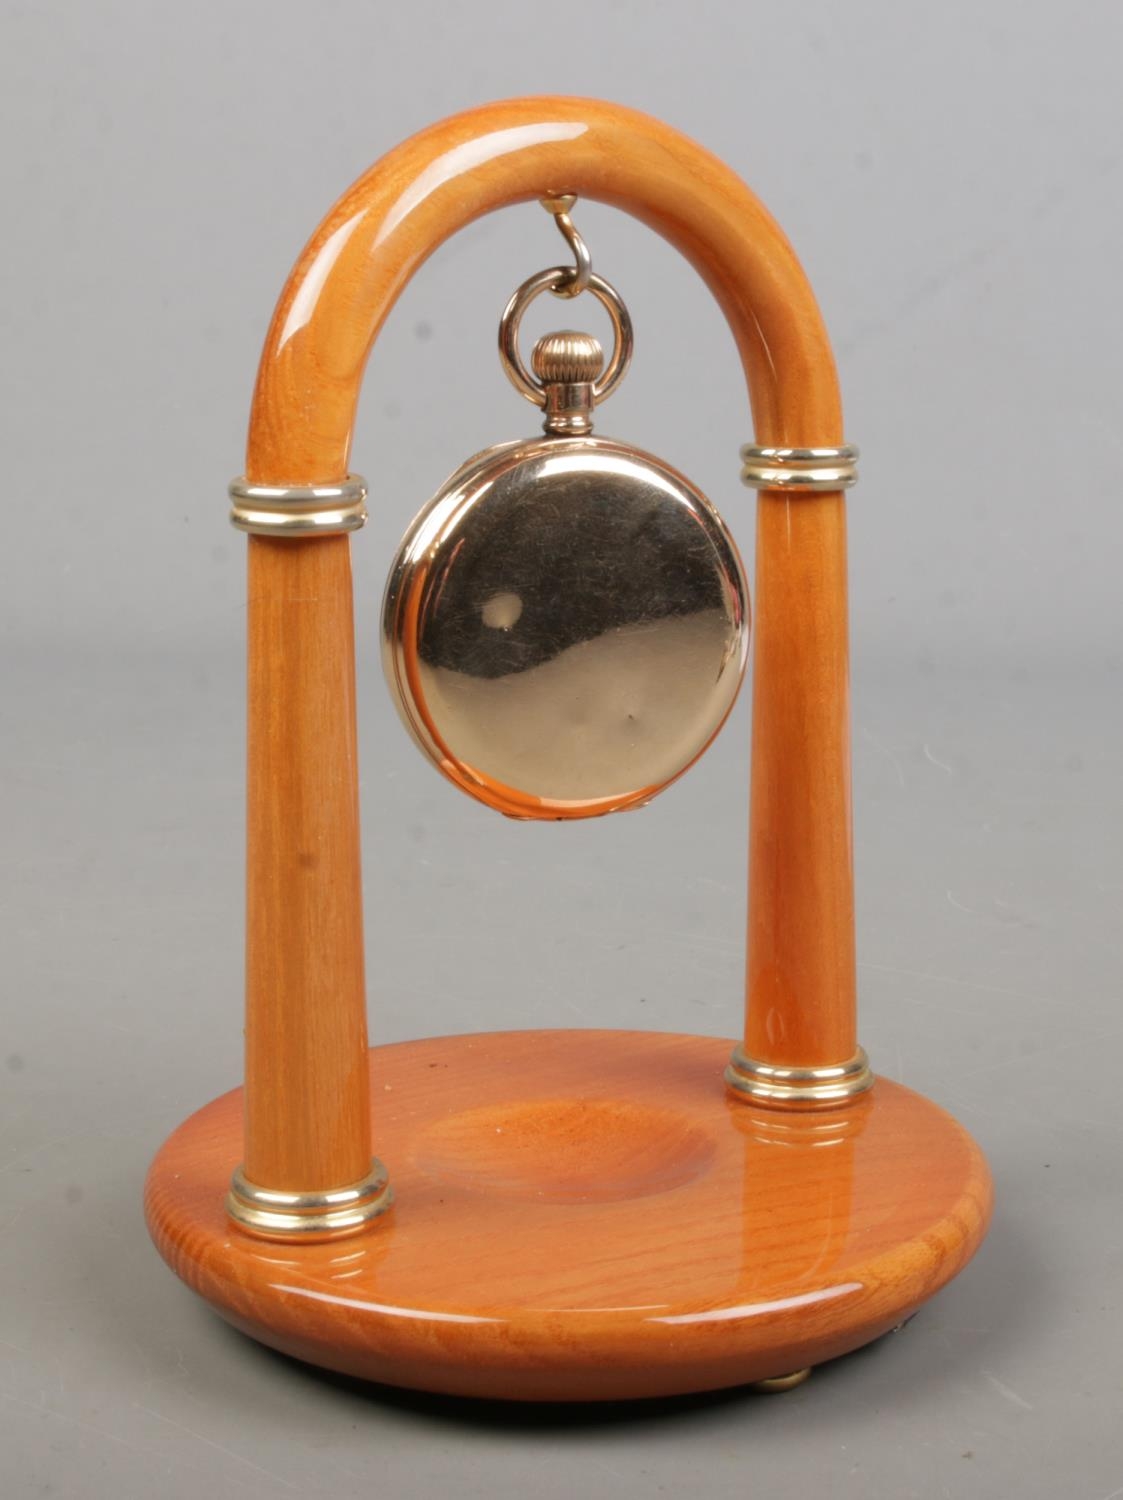 A gold plated Waltham full hunter pocket watch. With Rapport stand.